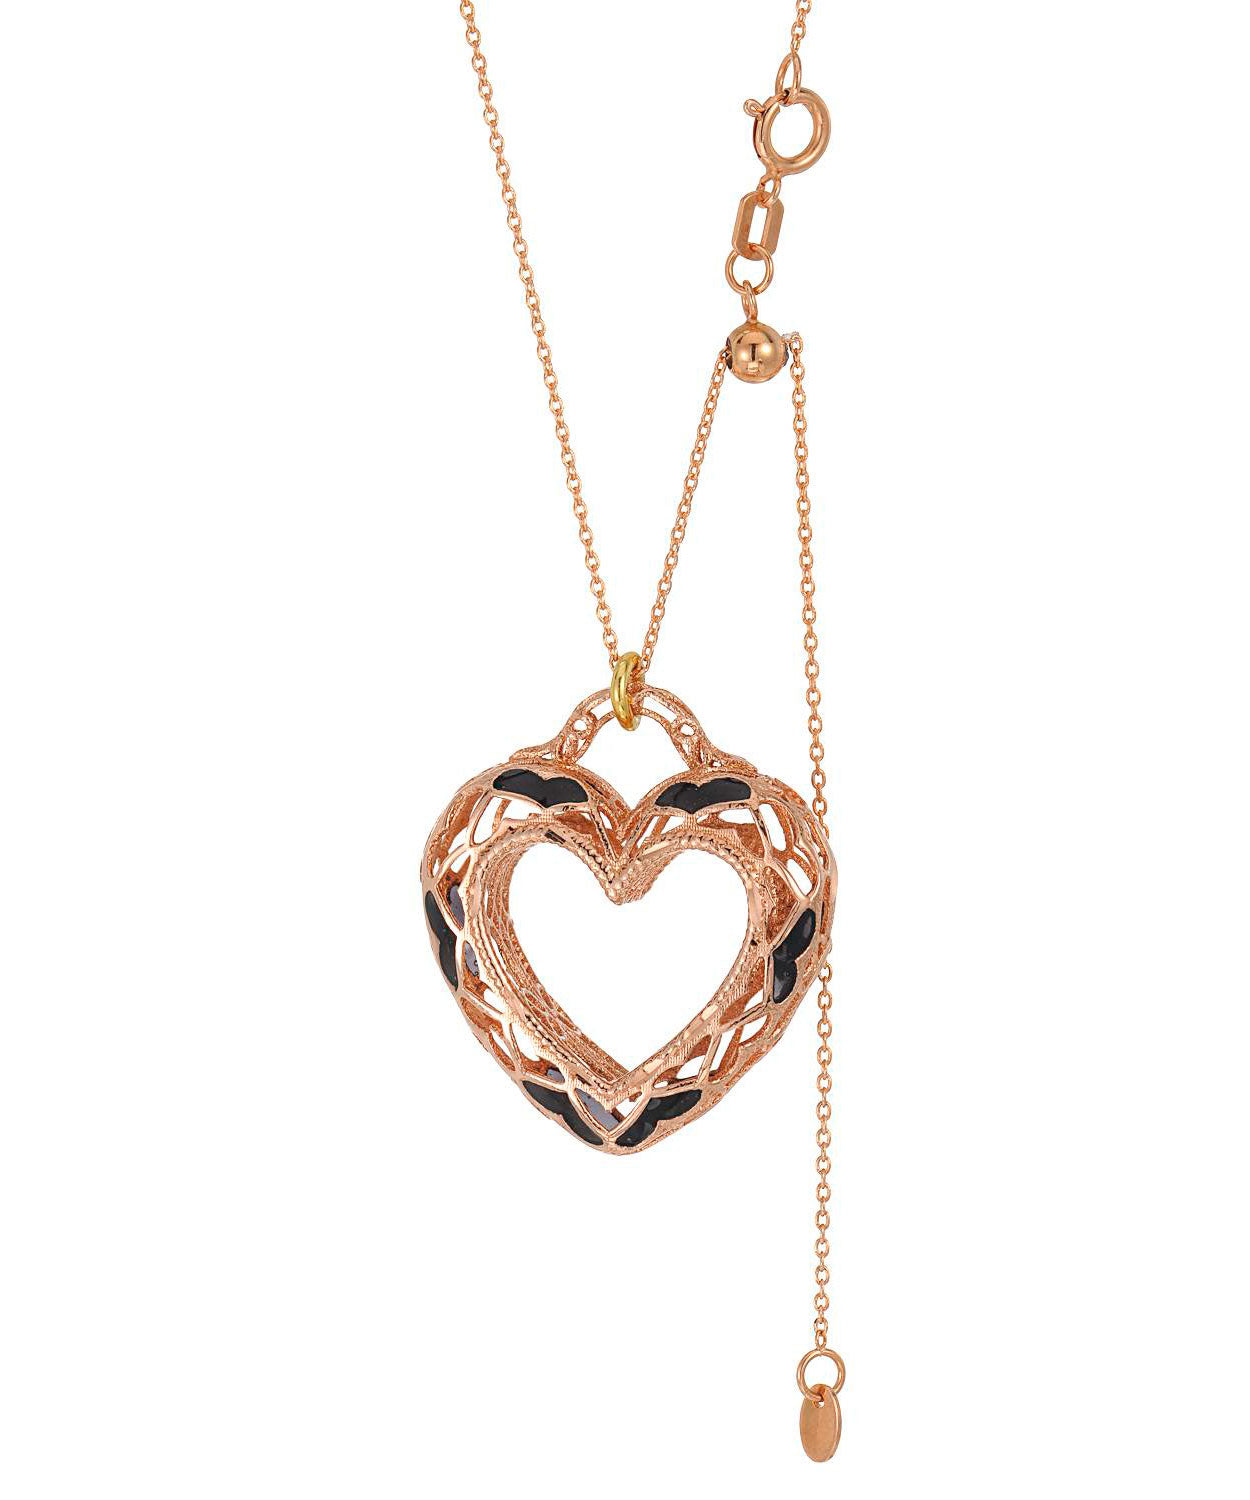 Patterns of Love Collection 14k Gold & Enamel Heart Adjustable Necklace - Made in Italy View 2